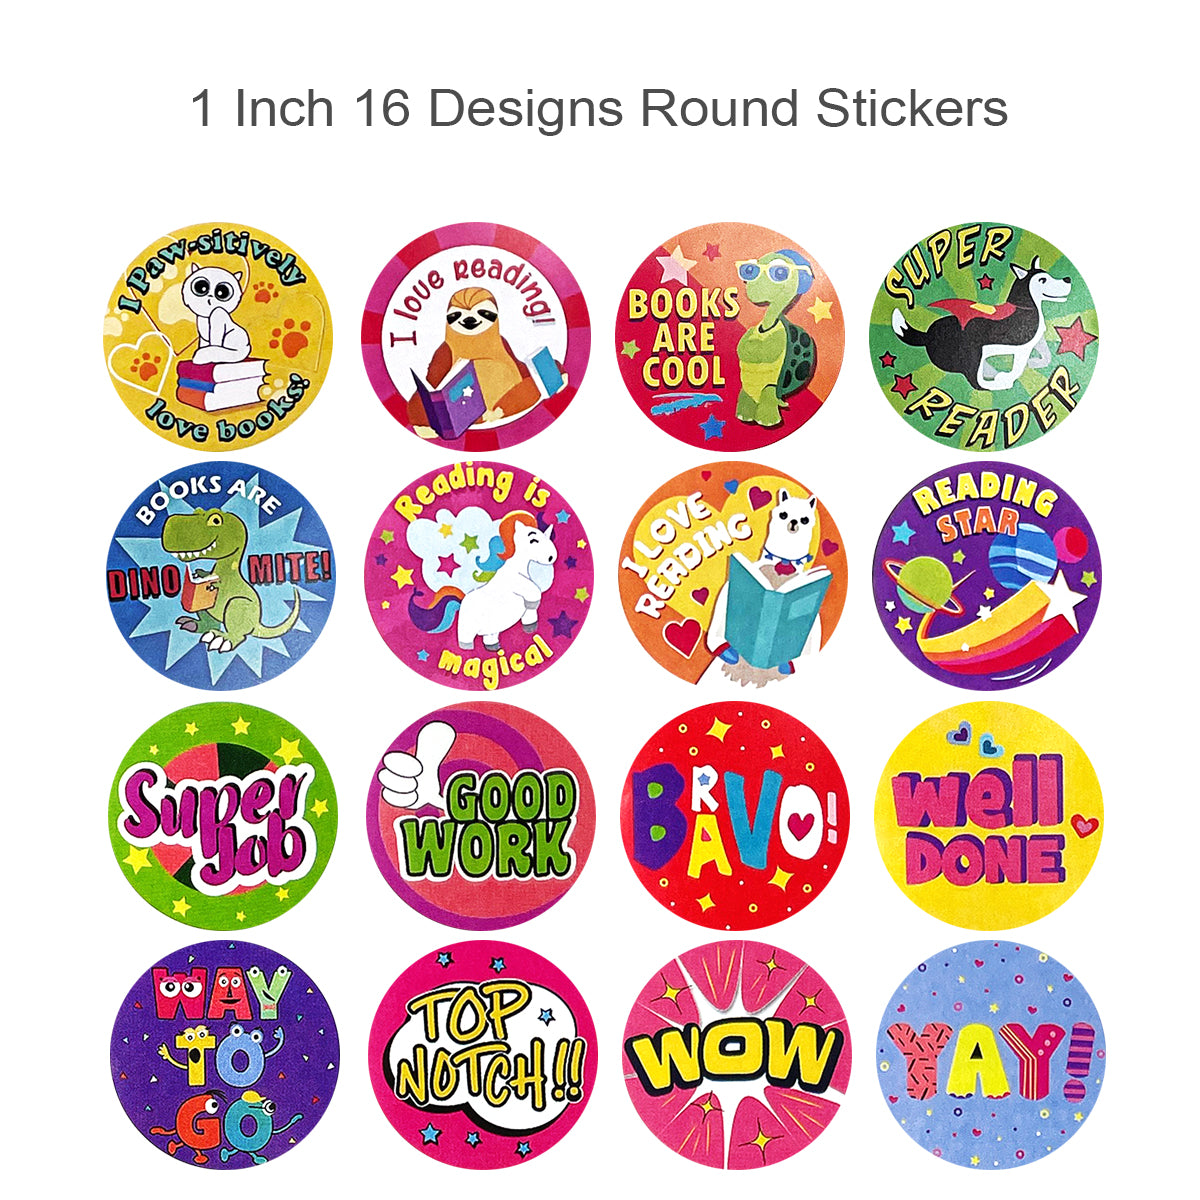 Wrapables 1 Inch Reward, Birthday, Thank You Stickers for Teachers, Students, Classrooms, Party Favors, Gifts, Boxes & Bags (1000pcs)